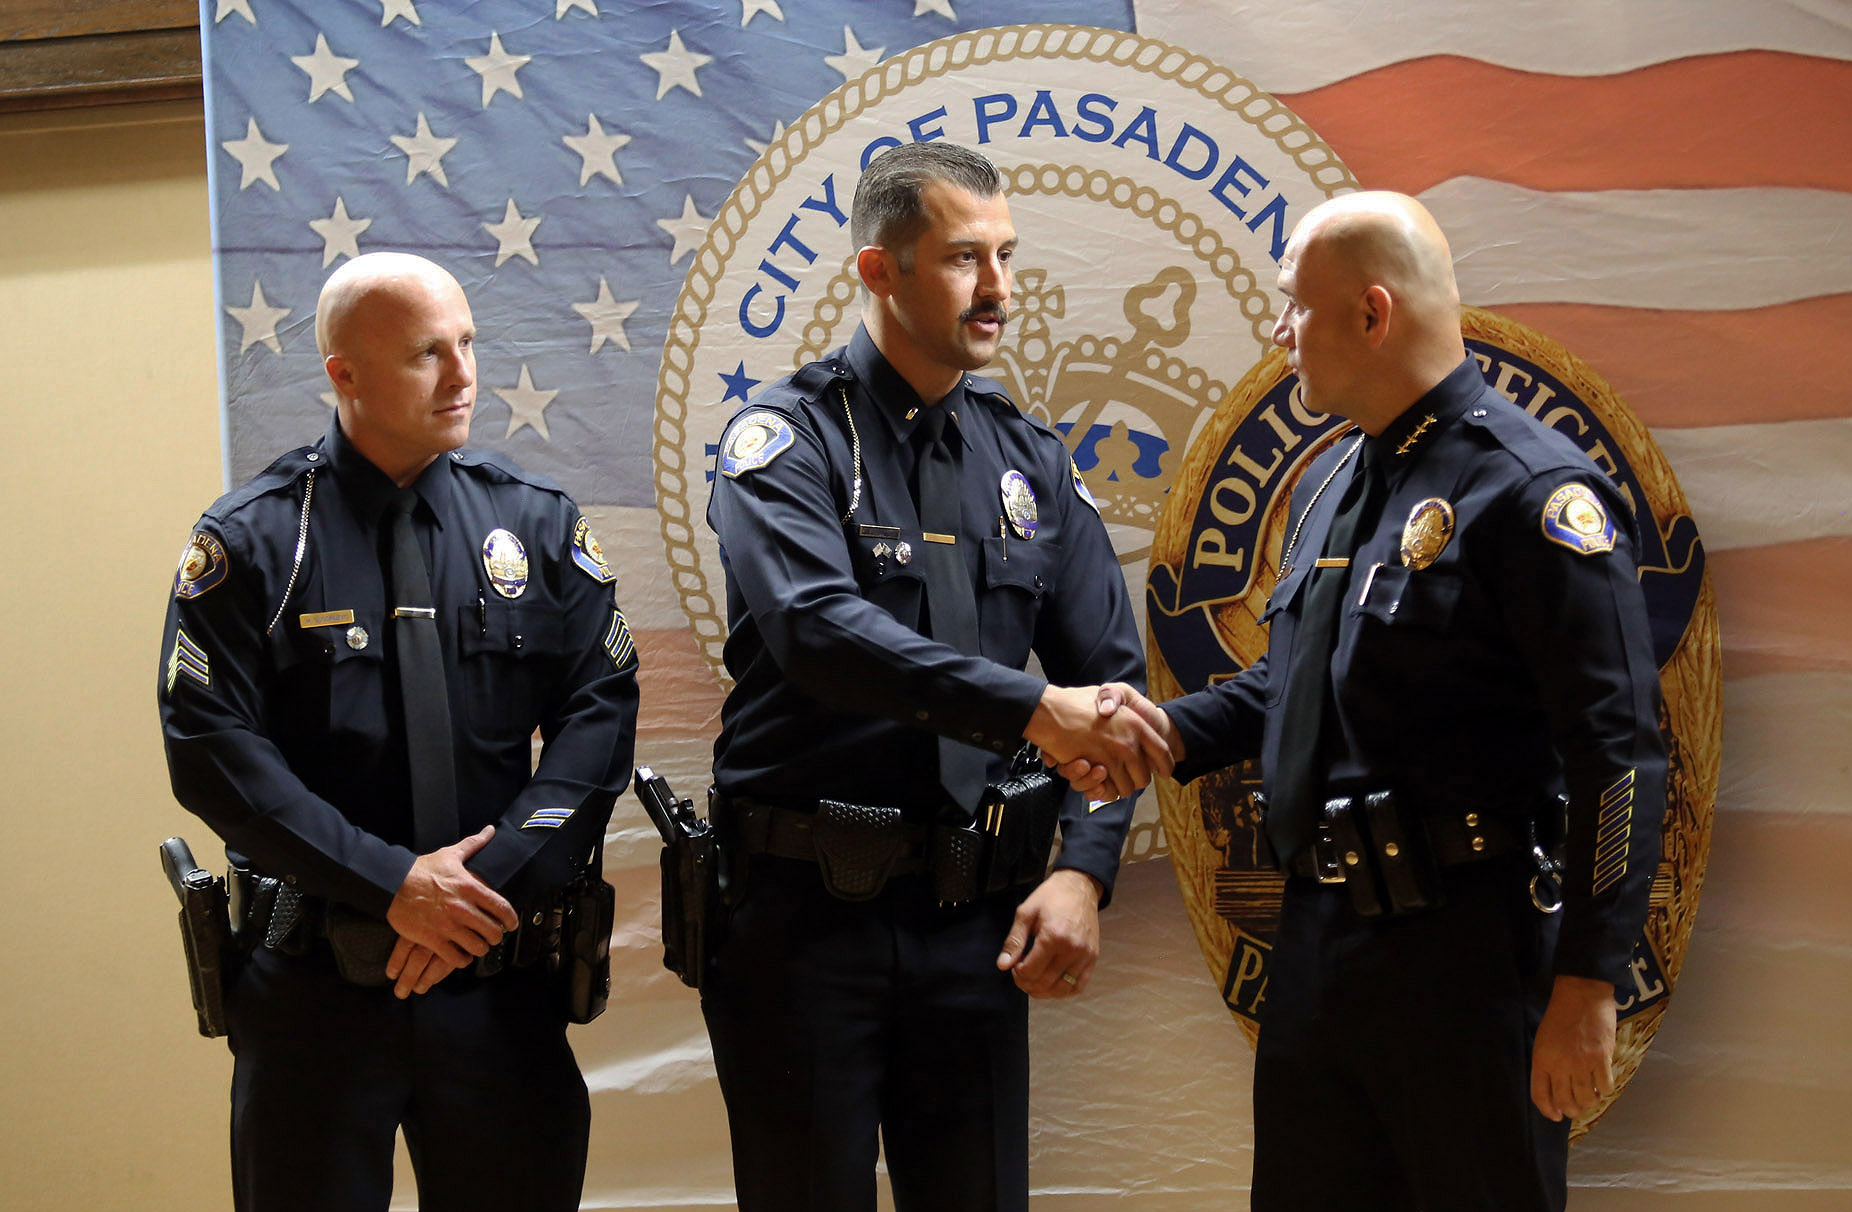 Pasadena Police Department celebrates new crop of police officers and promo...